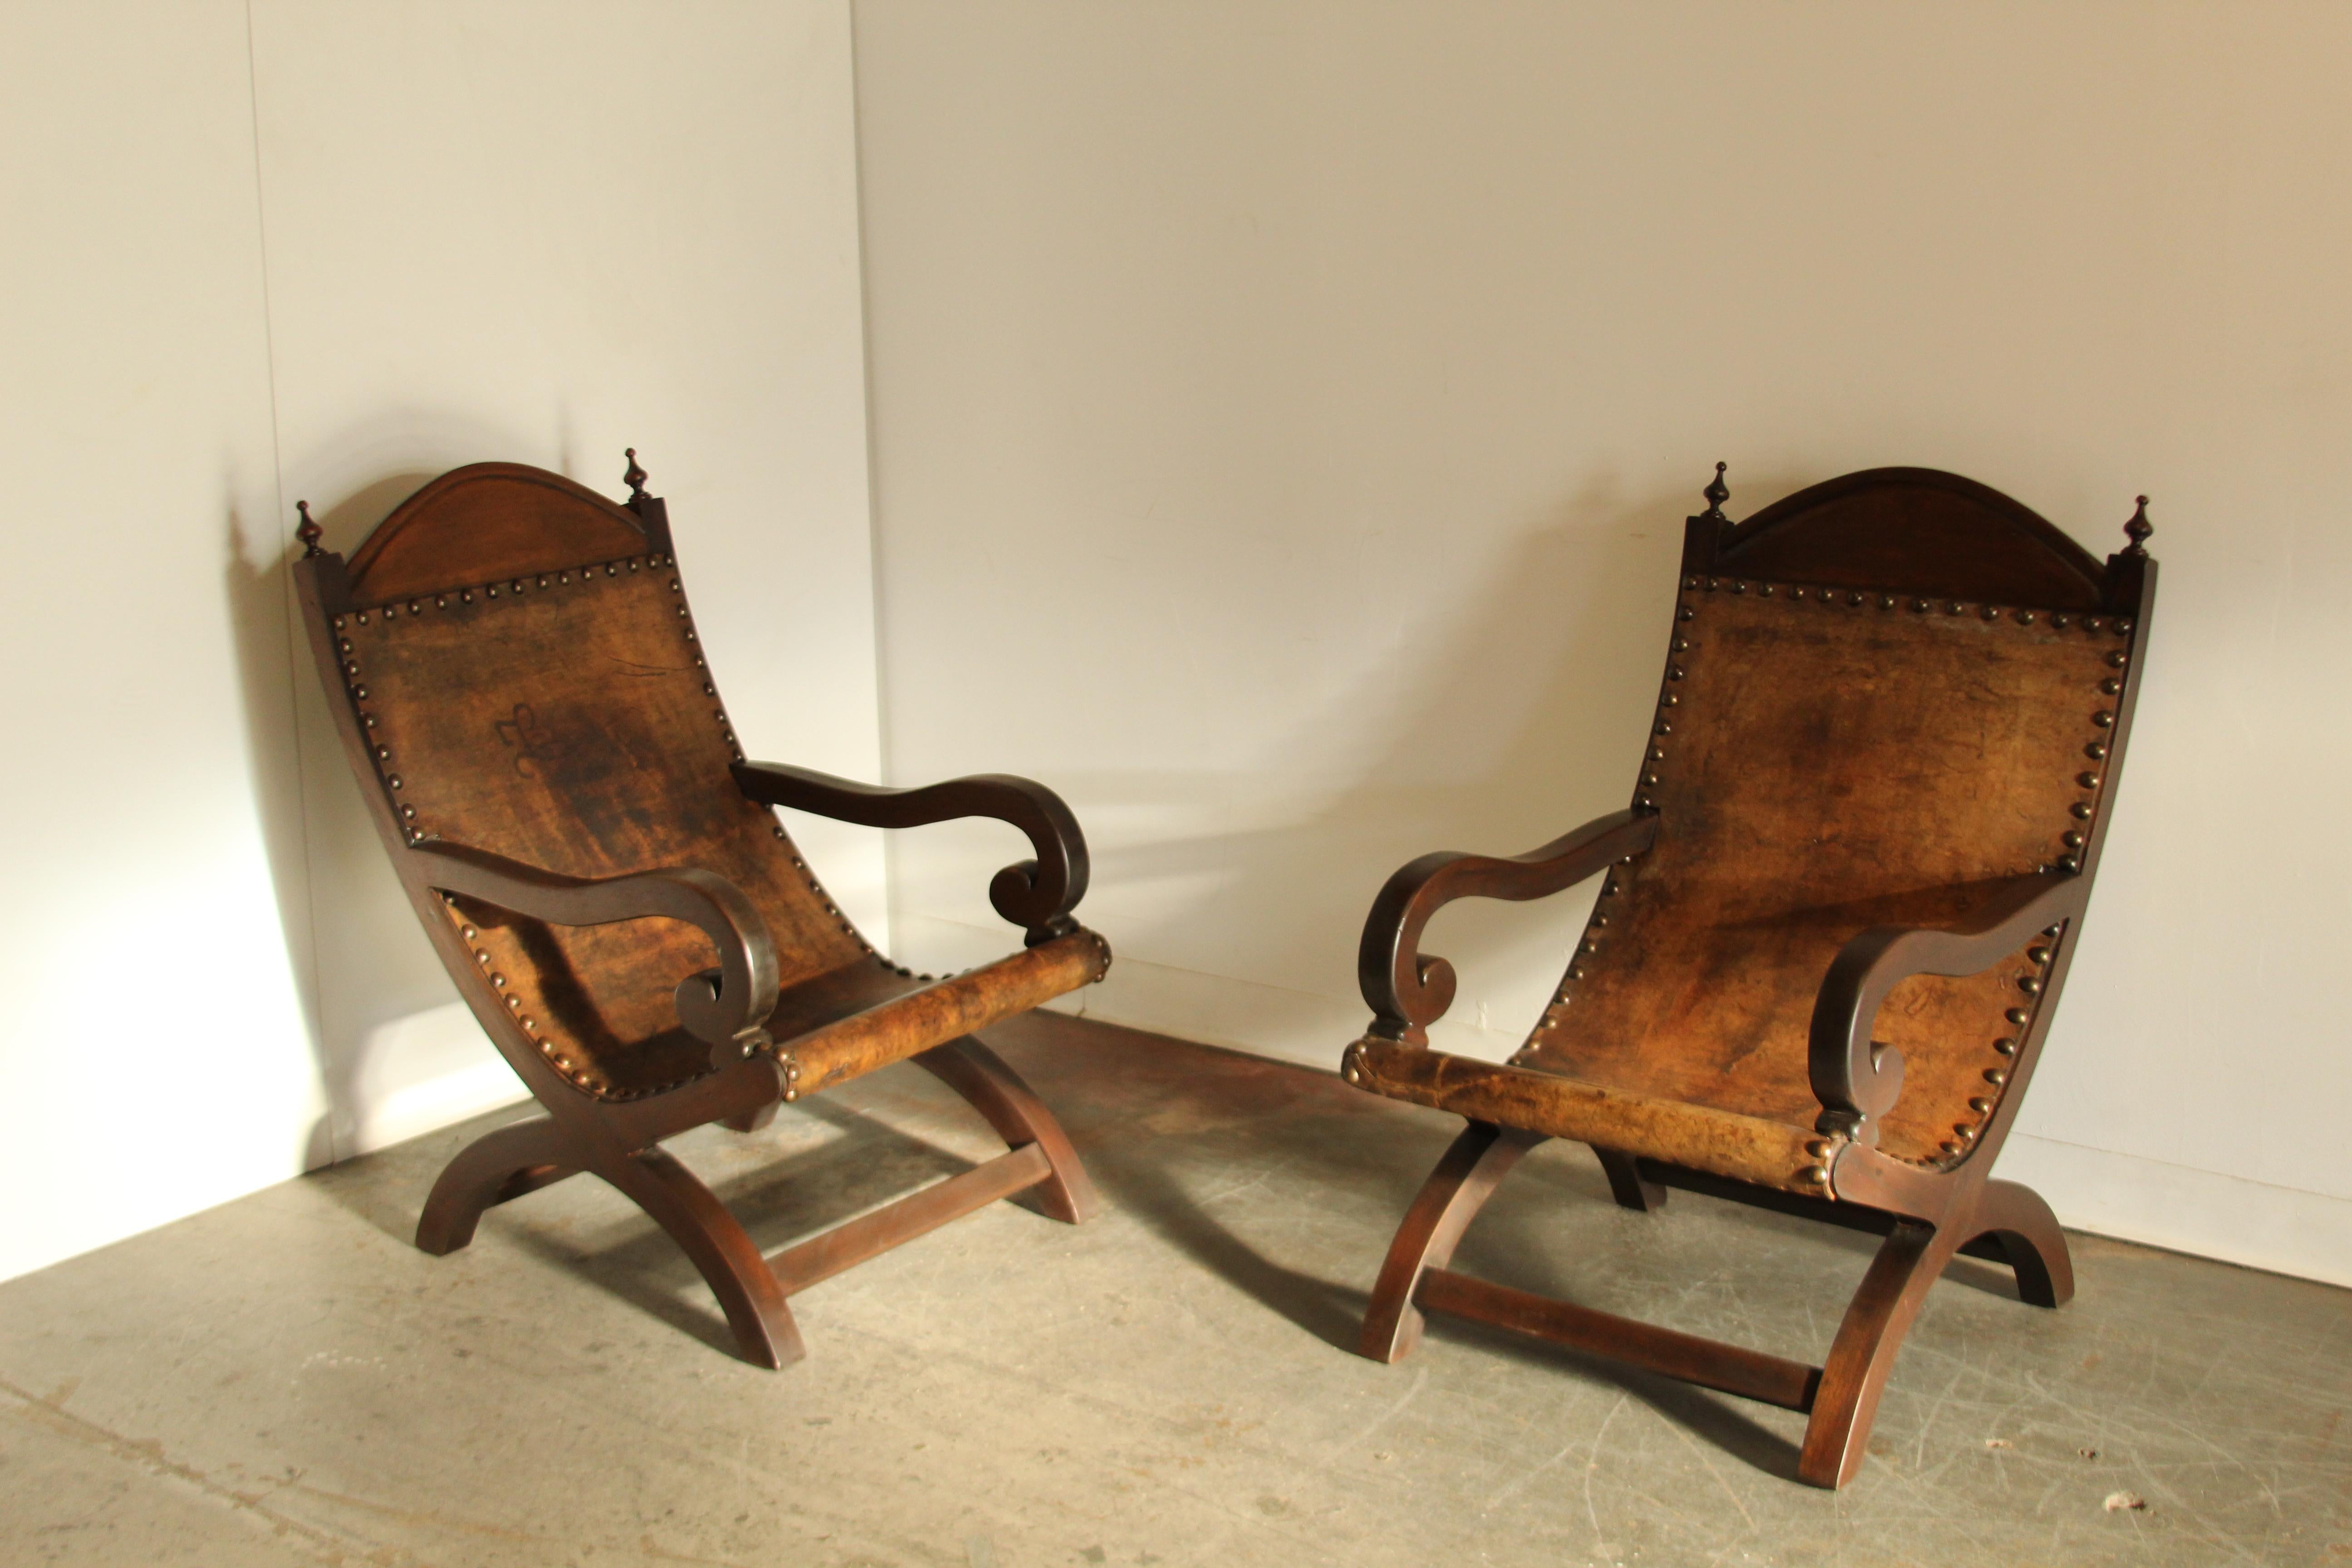 A wonderful pair of leather butaque chairs made in Mexico in the 1970s. Delightful rustic, primitive aesthetic. Solid wood frames with classically curled arms, scoop form, and the tops adorned with ornate finials. Thick, distressed leather cowhide